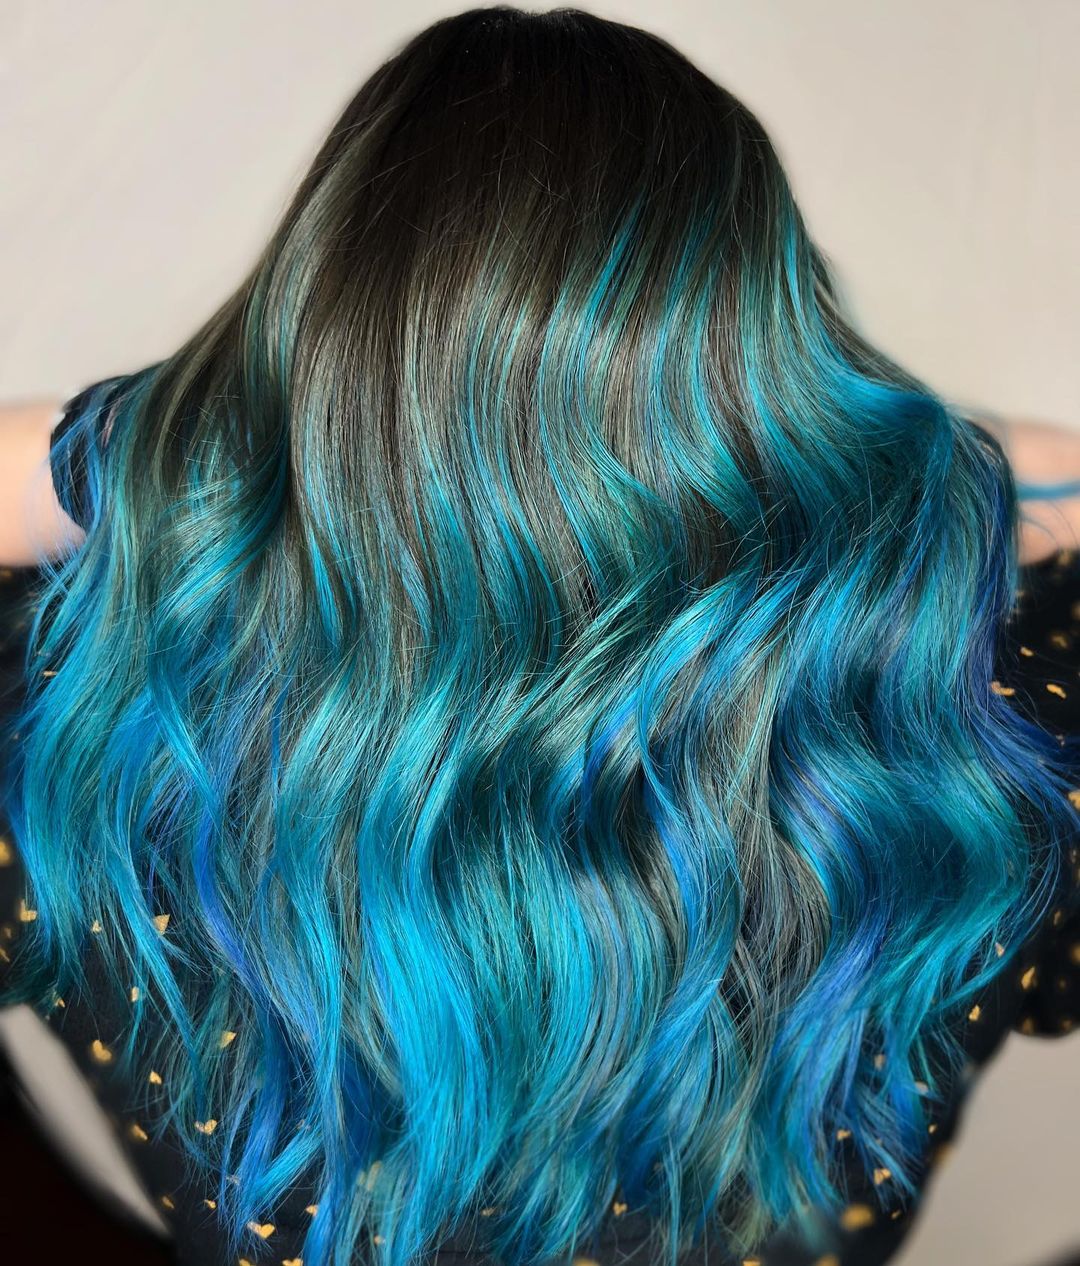 Dark Roots to Teal Ombre Hair